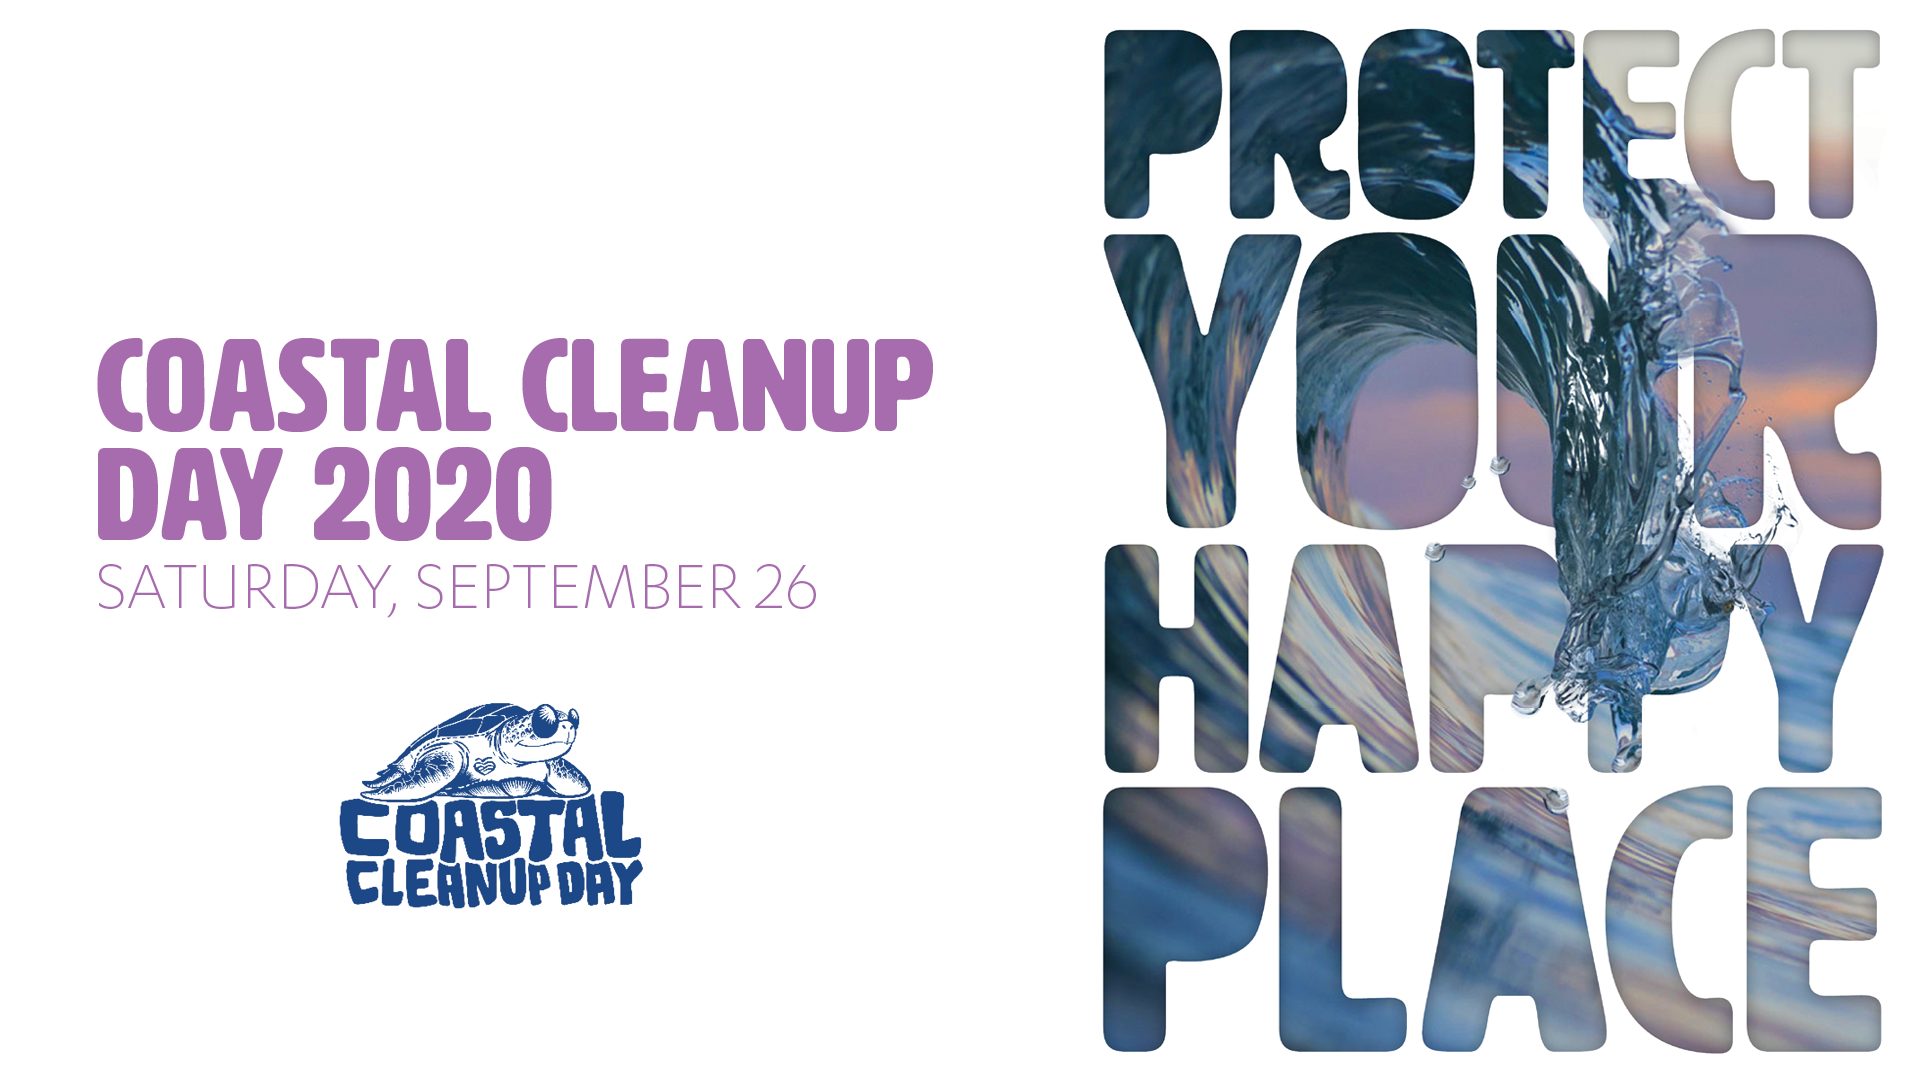 Coastal Cleanup Day 2020